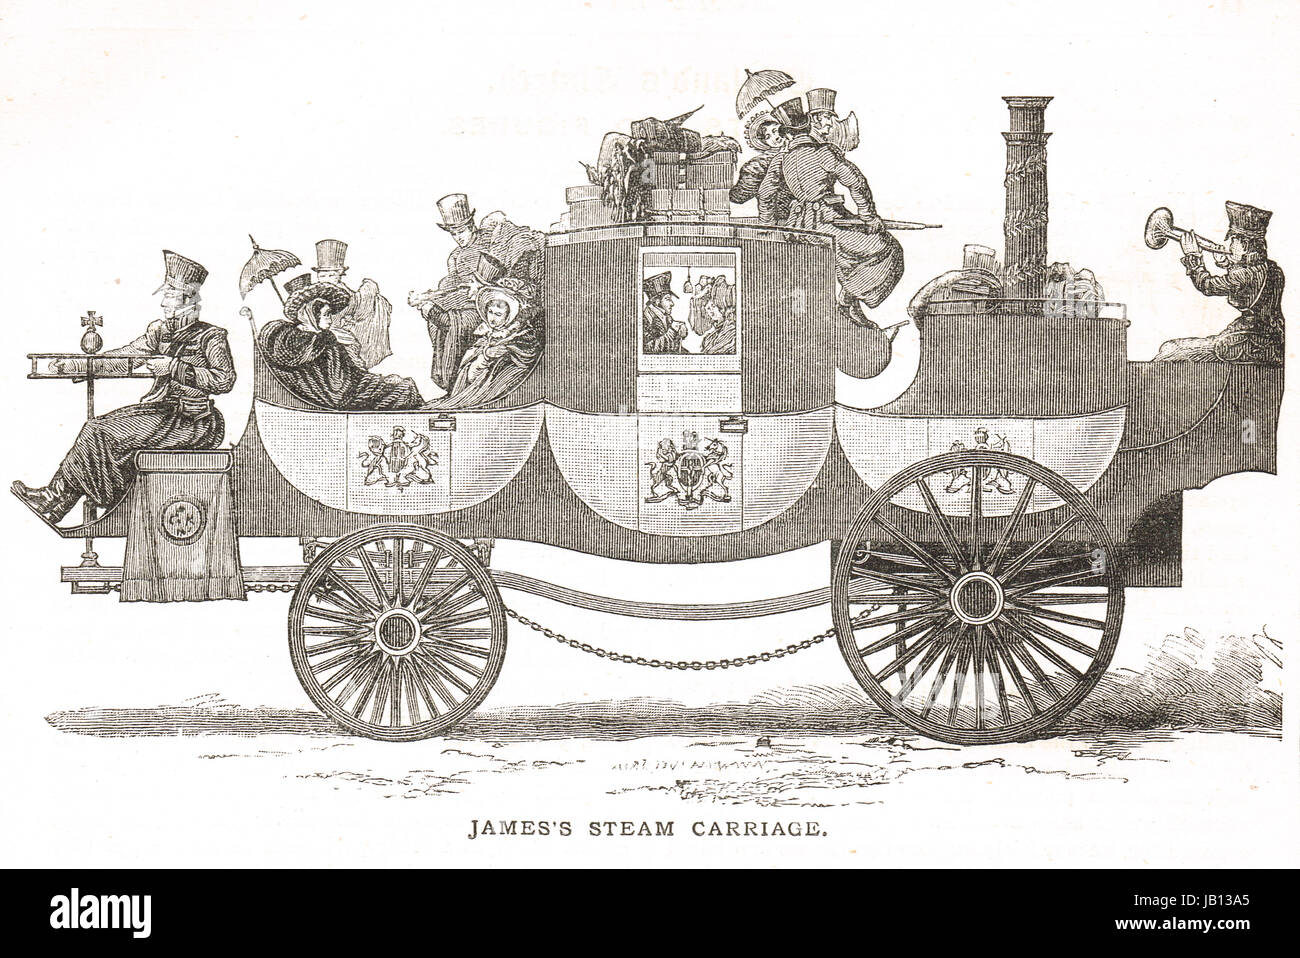 W H James's Steam Carriage of 1829 Stock Photo